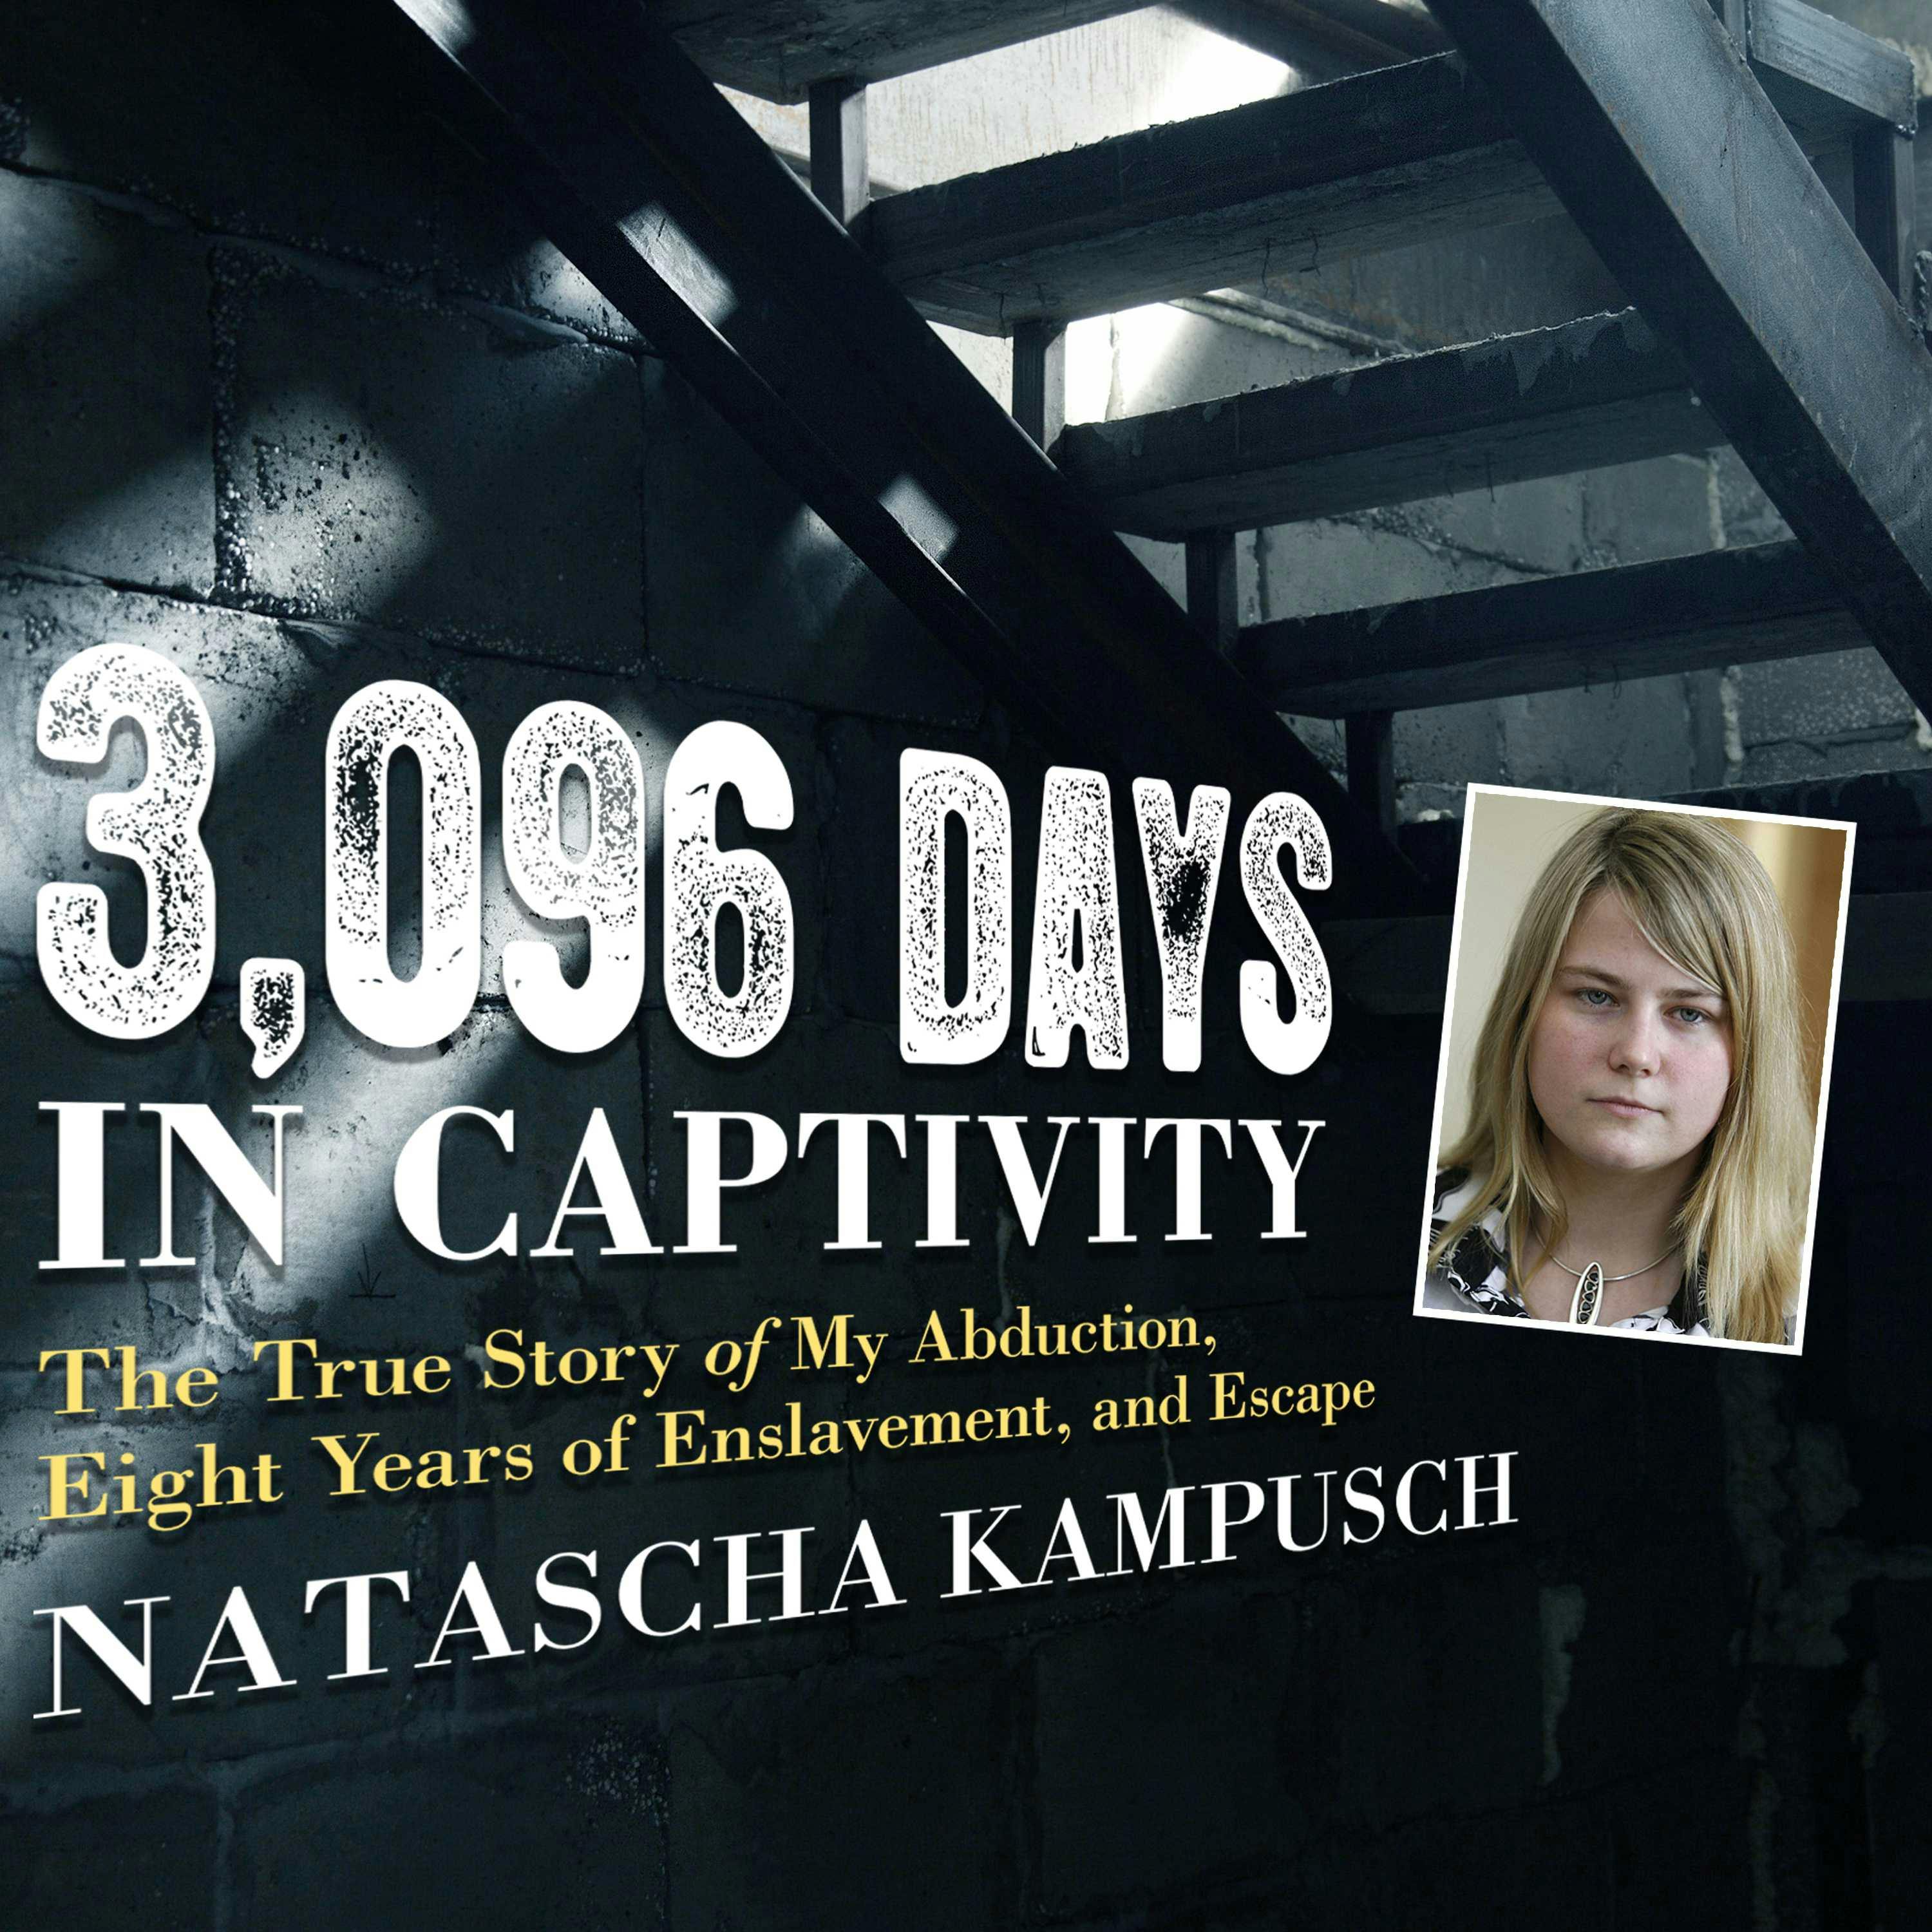 3,096 Days in Captivity: The True Story of My Abduction, Eight Years of Enslavement, and Escape - undefined